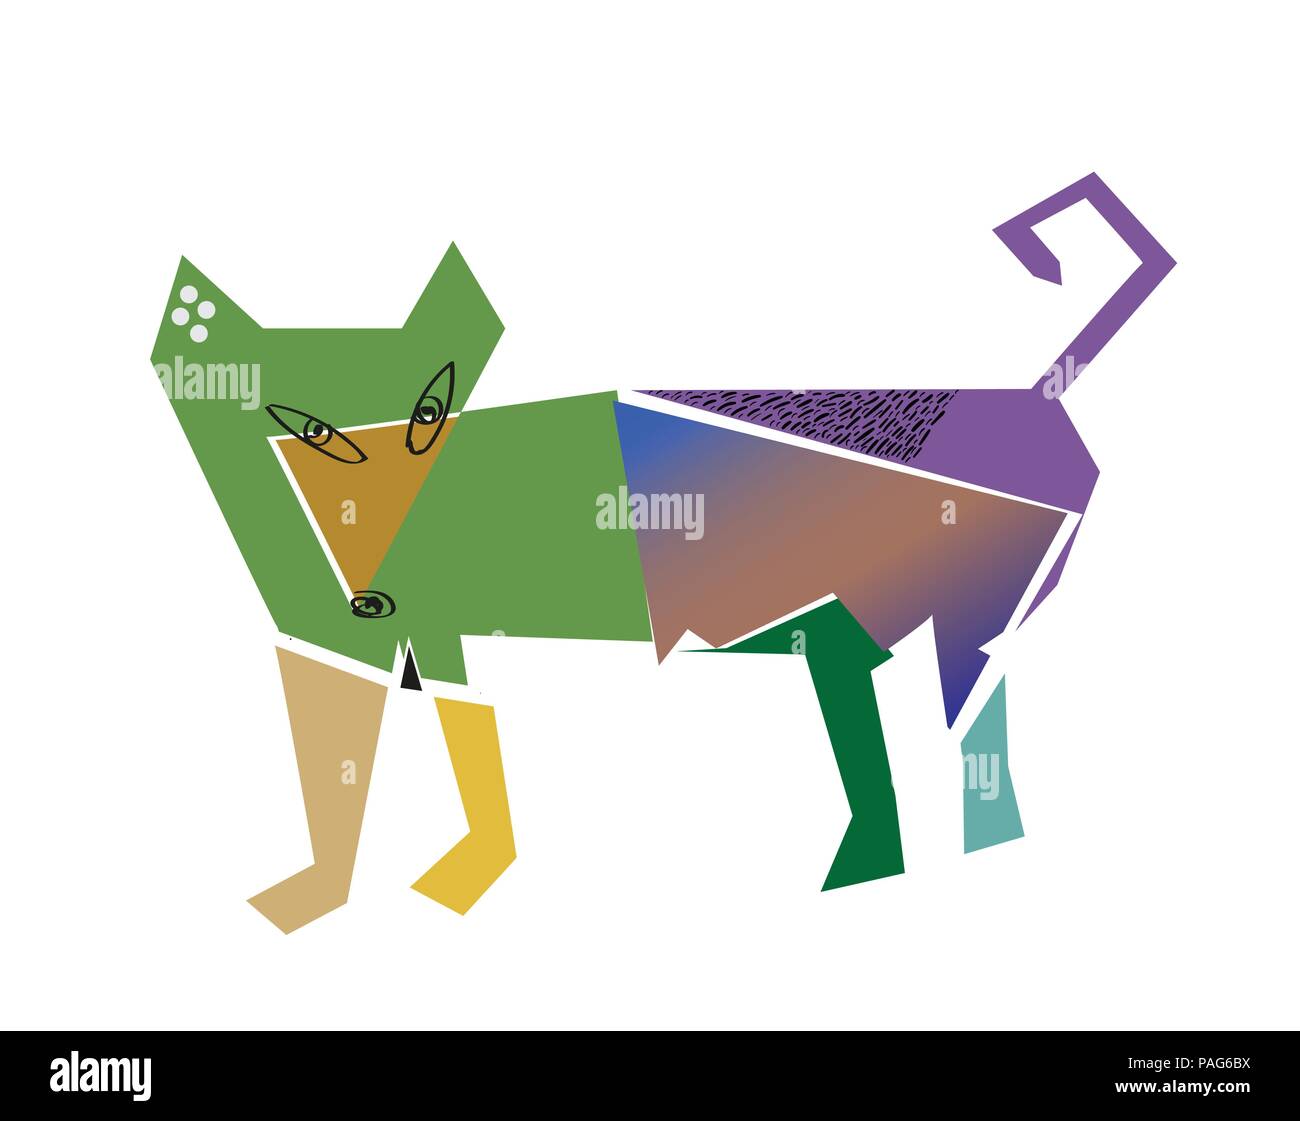 Dog in cubism style Stock Vector